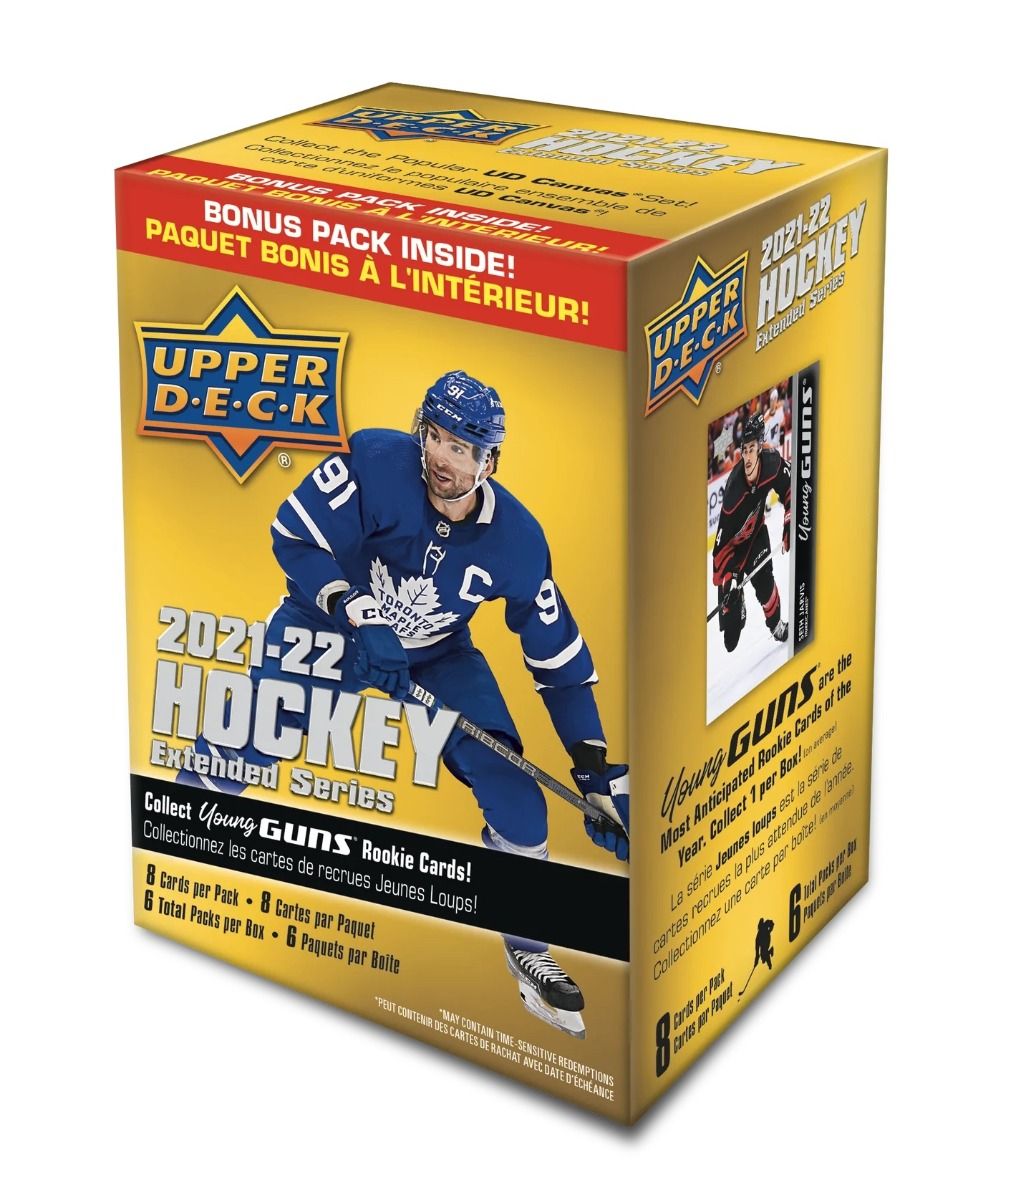 Upper Deck 2021-22 Hockey Extended Series | L.A. Mood Comics and Games